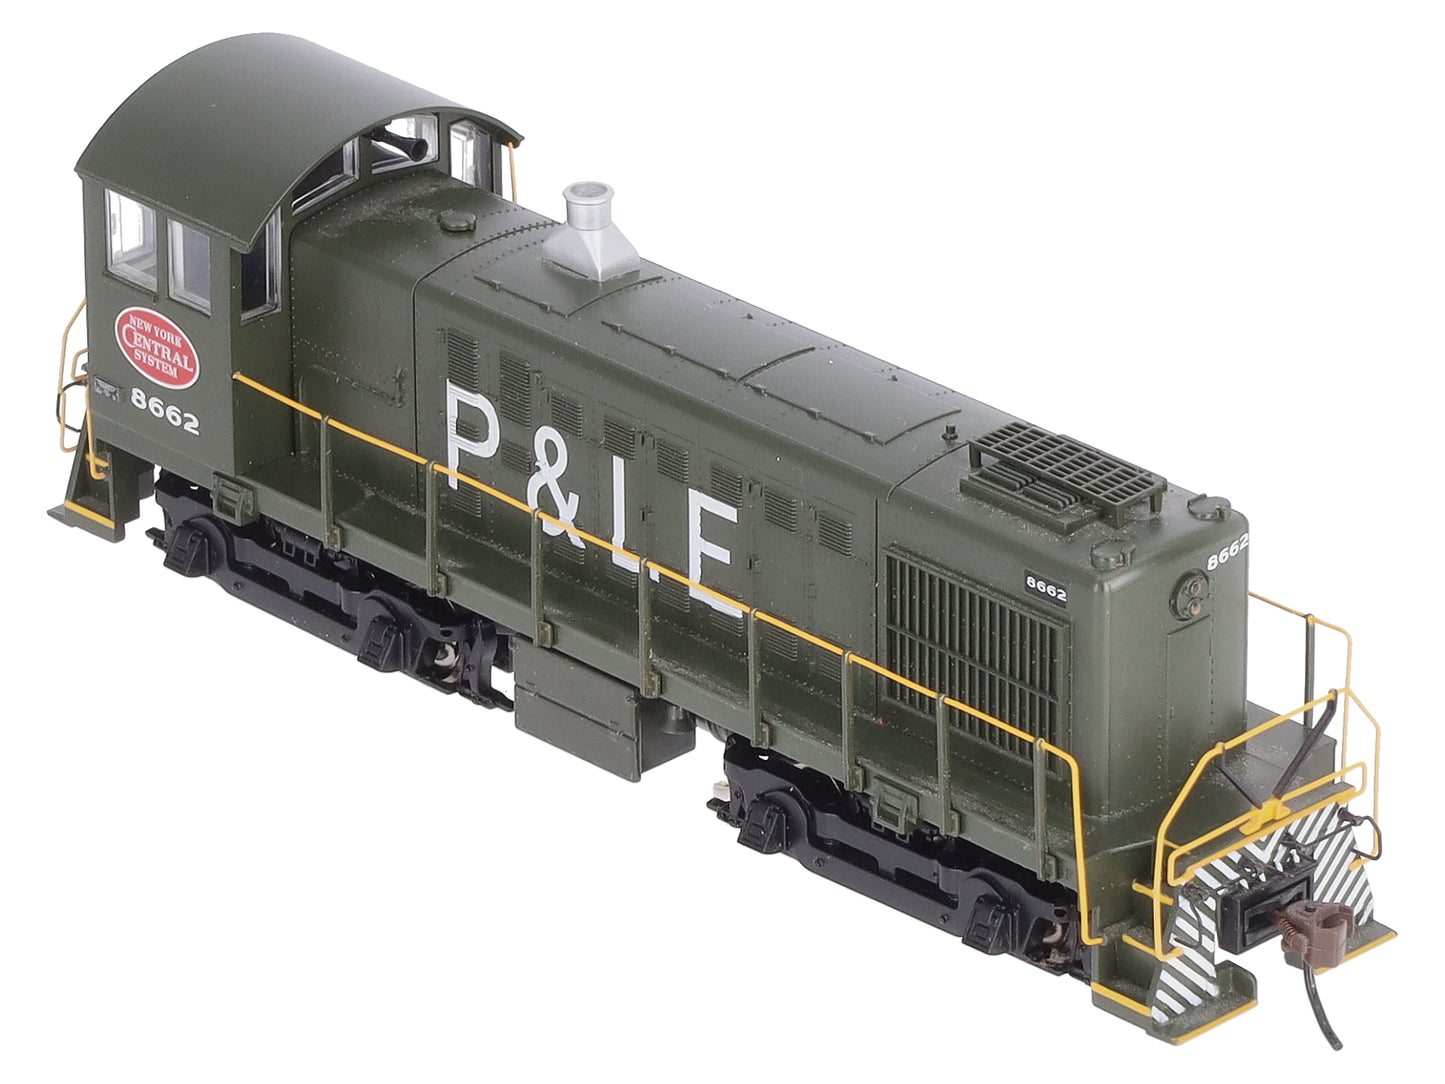 Bachmann 63203 HO NYC System P & LE Alco S4 Diesel #8662 with DCC & Sound LN/Box